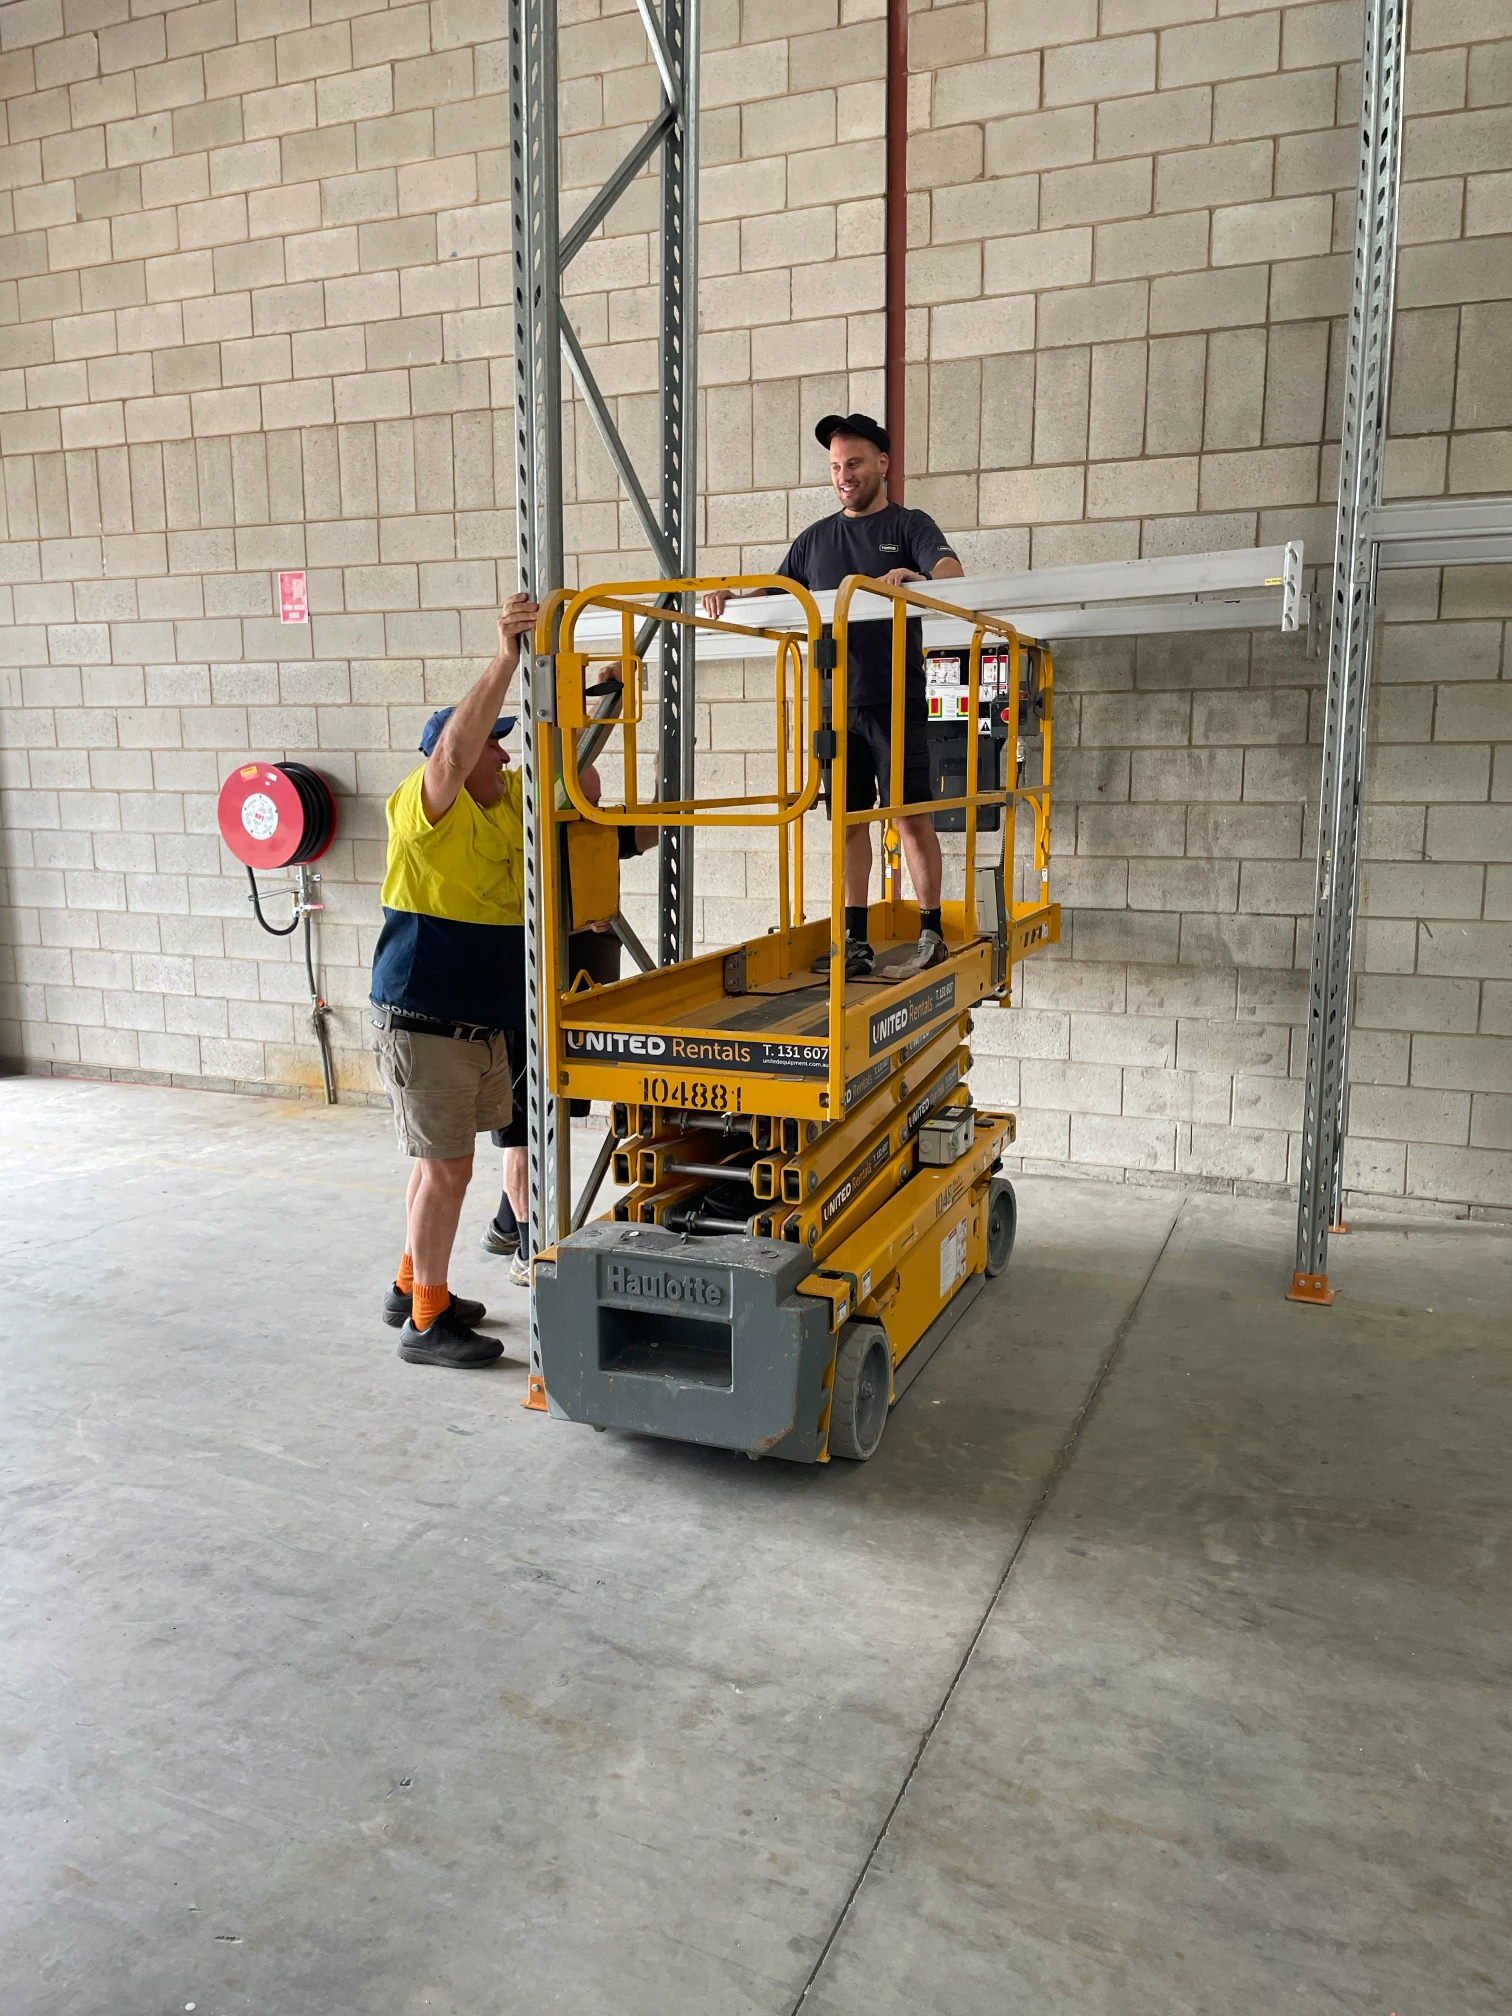 Maipac General Manager, Paul Maione On Scissor Lift in Adelaide Coffee Warehouse